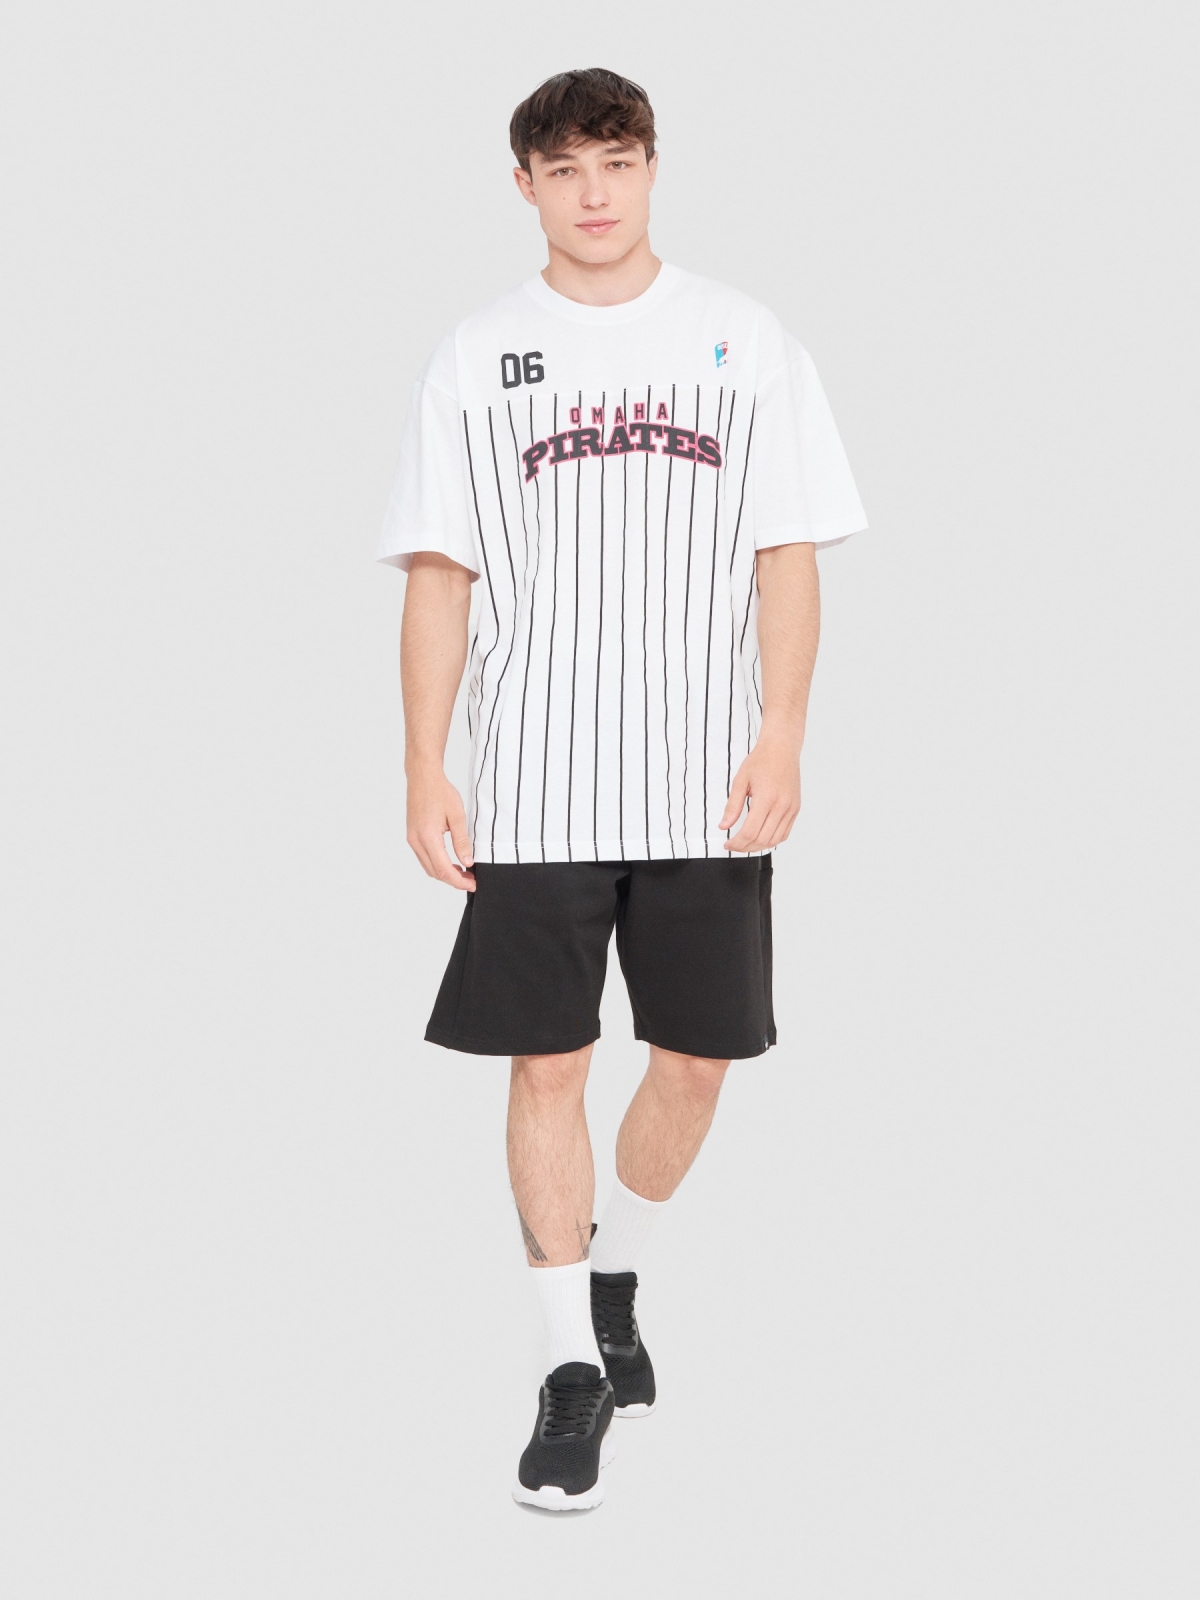 Sports striped T-shirt white front view